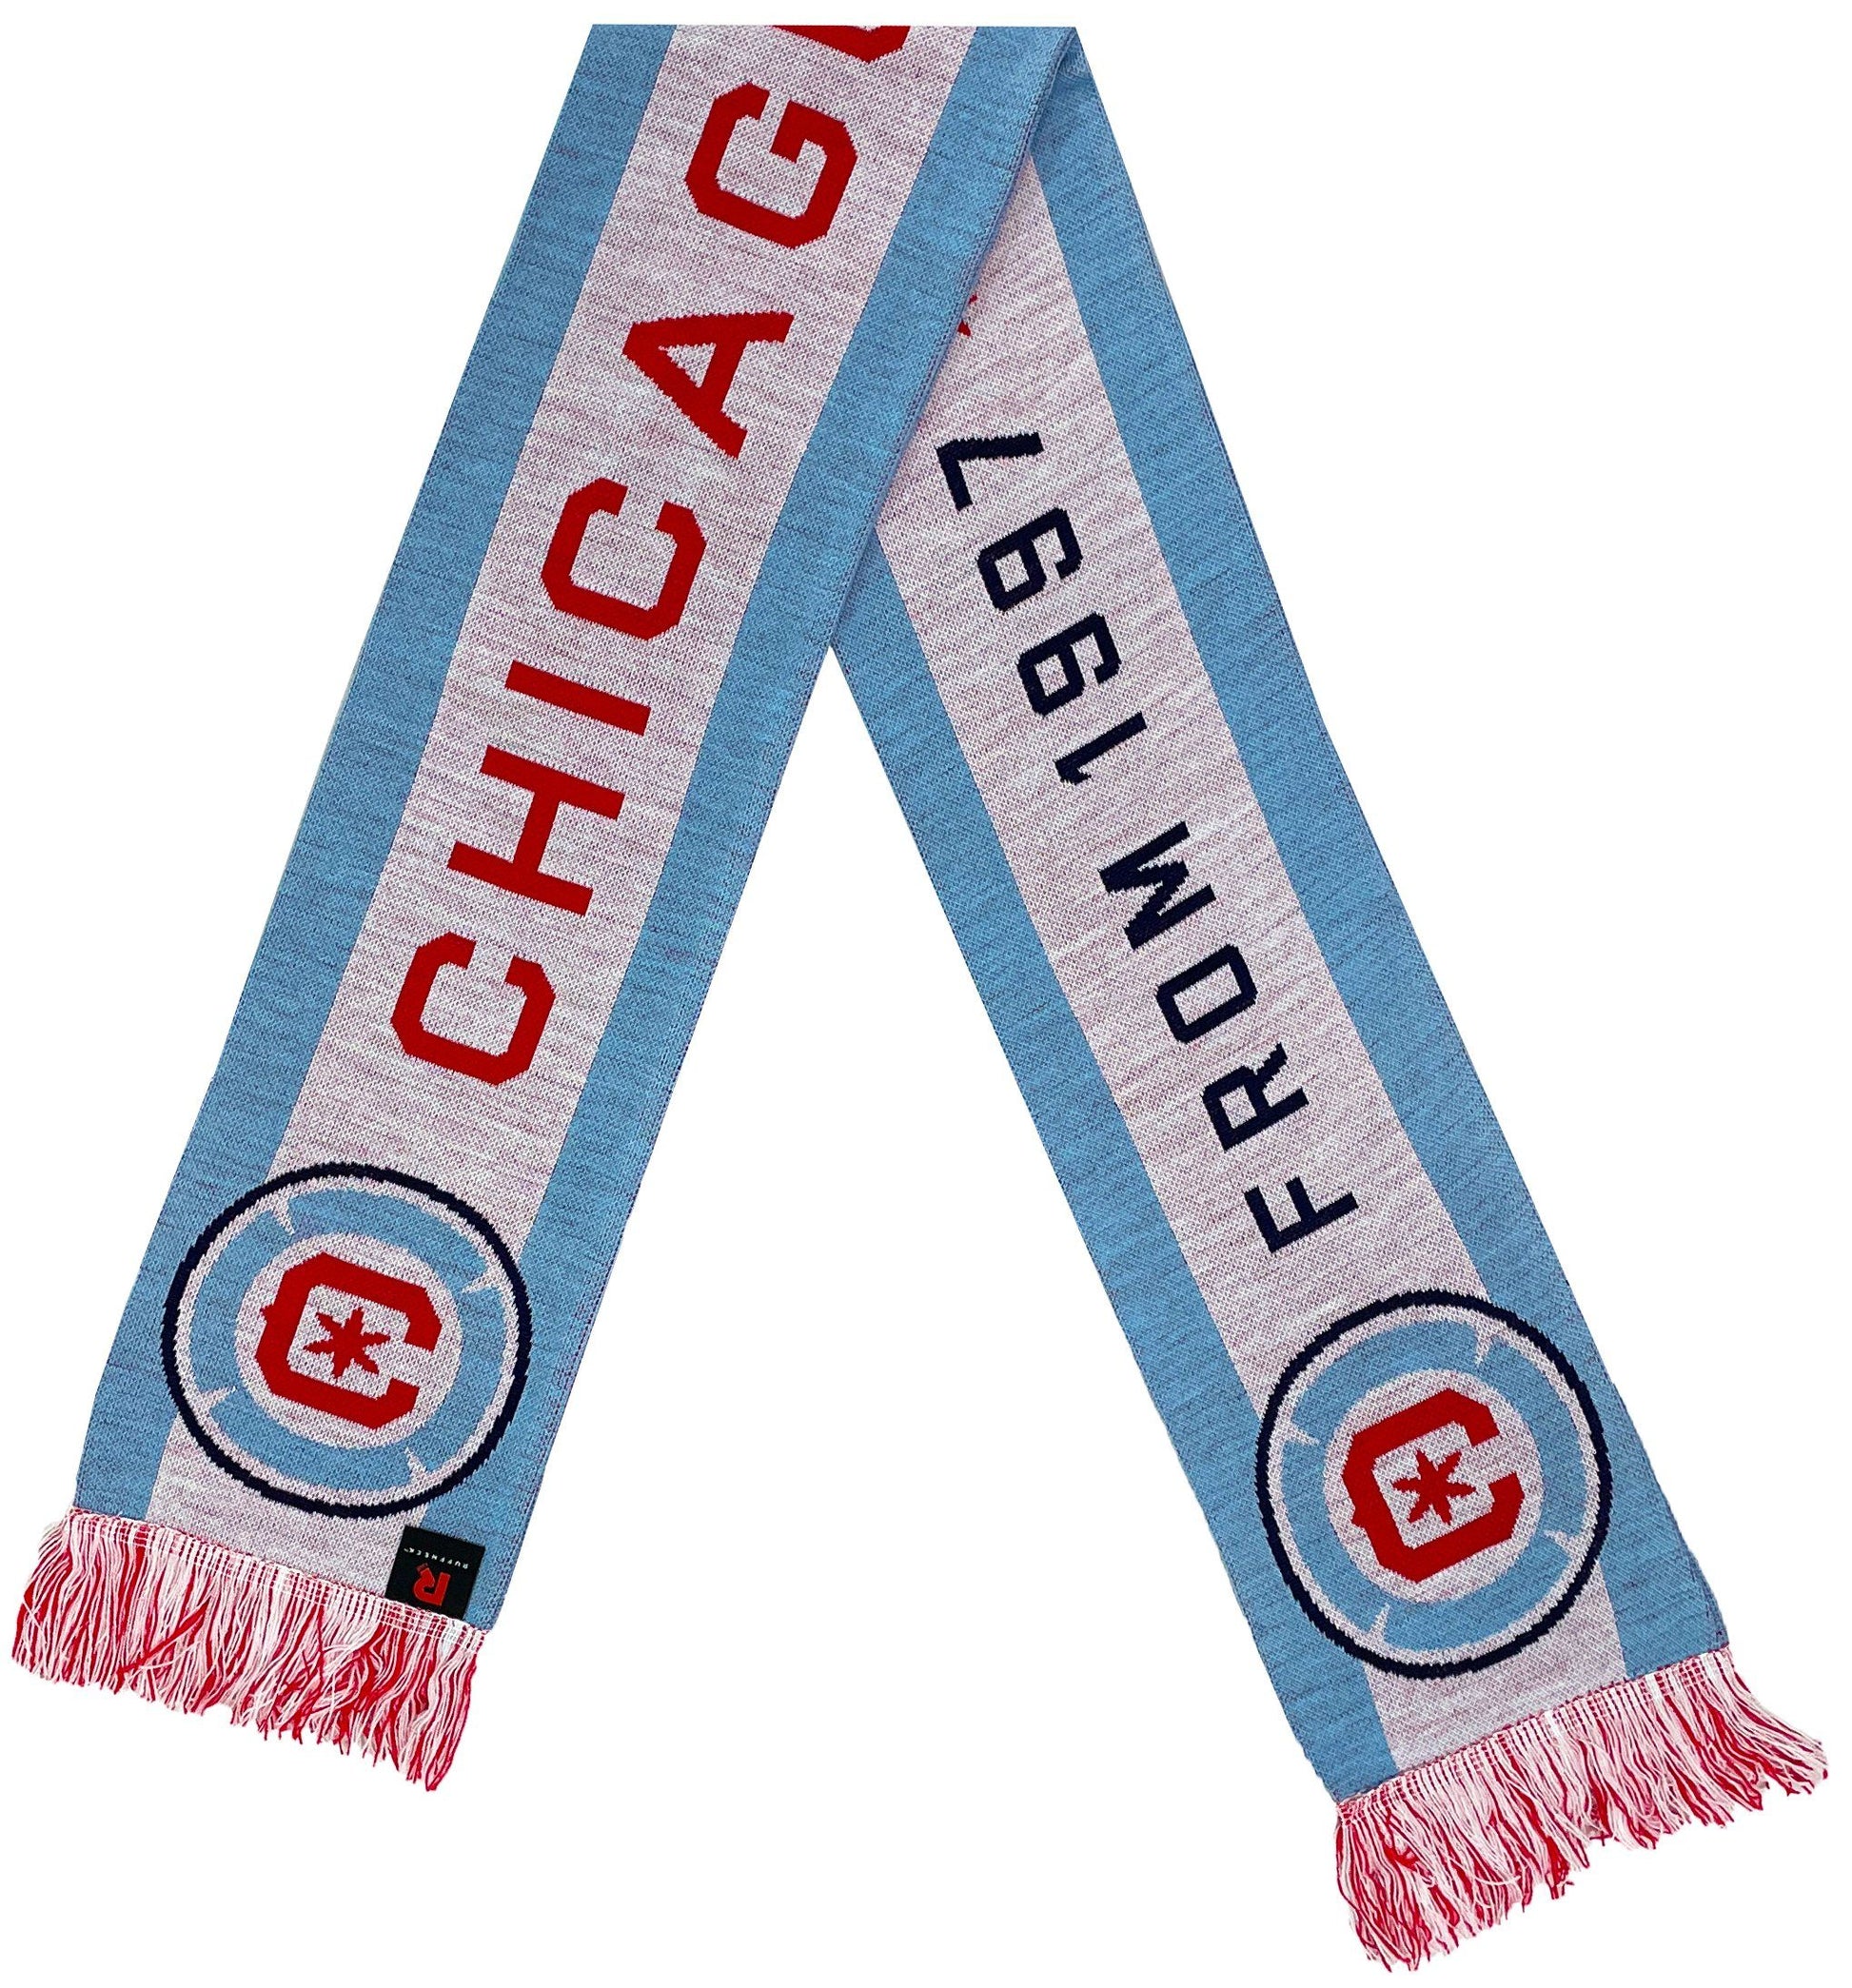 CHICAGO FIRE FC SCARF - From 1997 Til Forever (HD Knit)